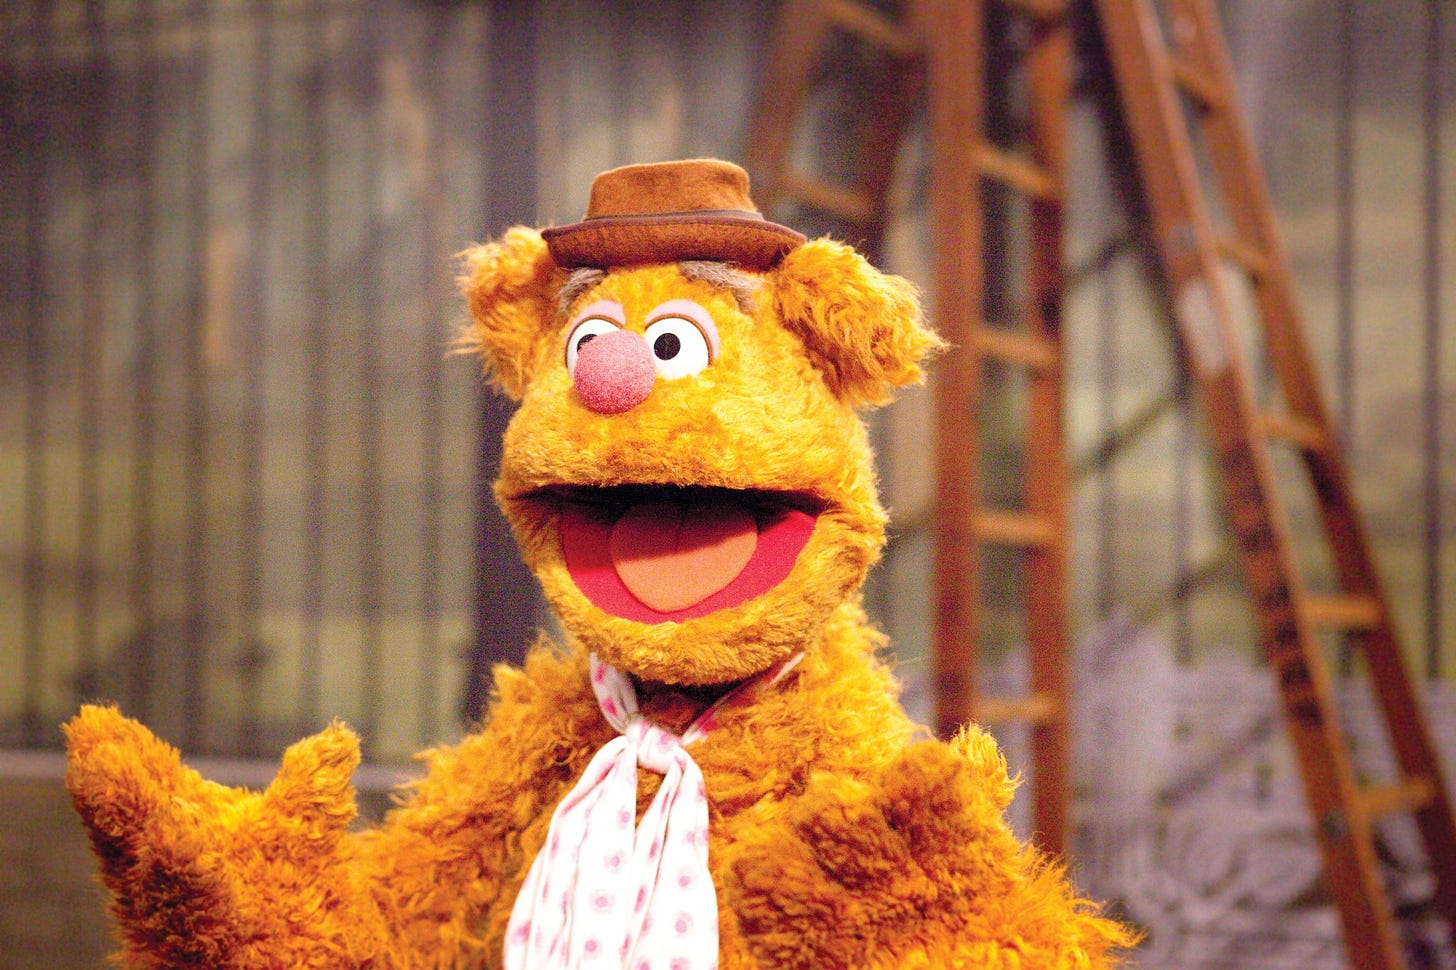 Wocka wocka! Deconstructing the fascinating lingo of the Muppets. | The Week